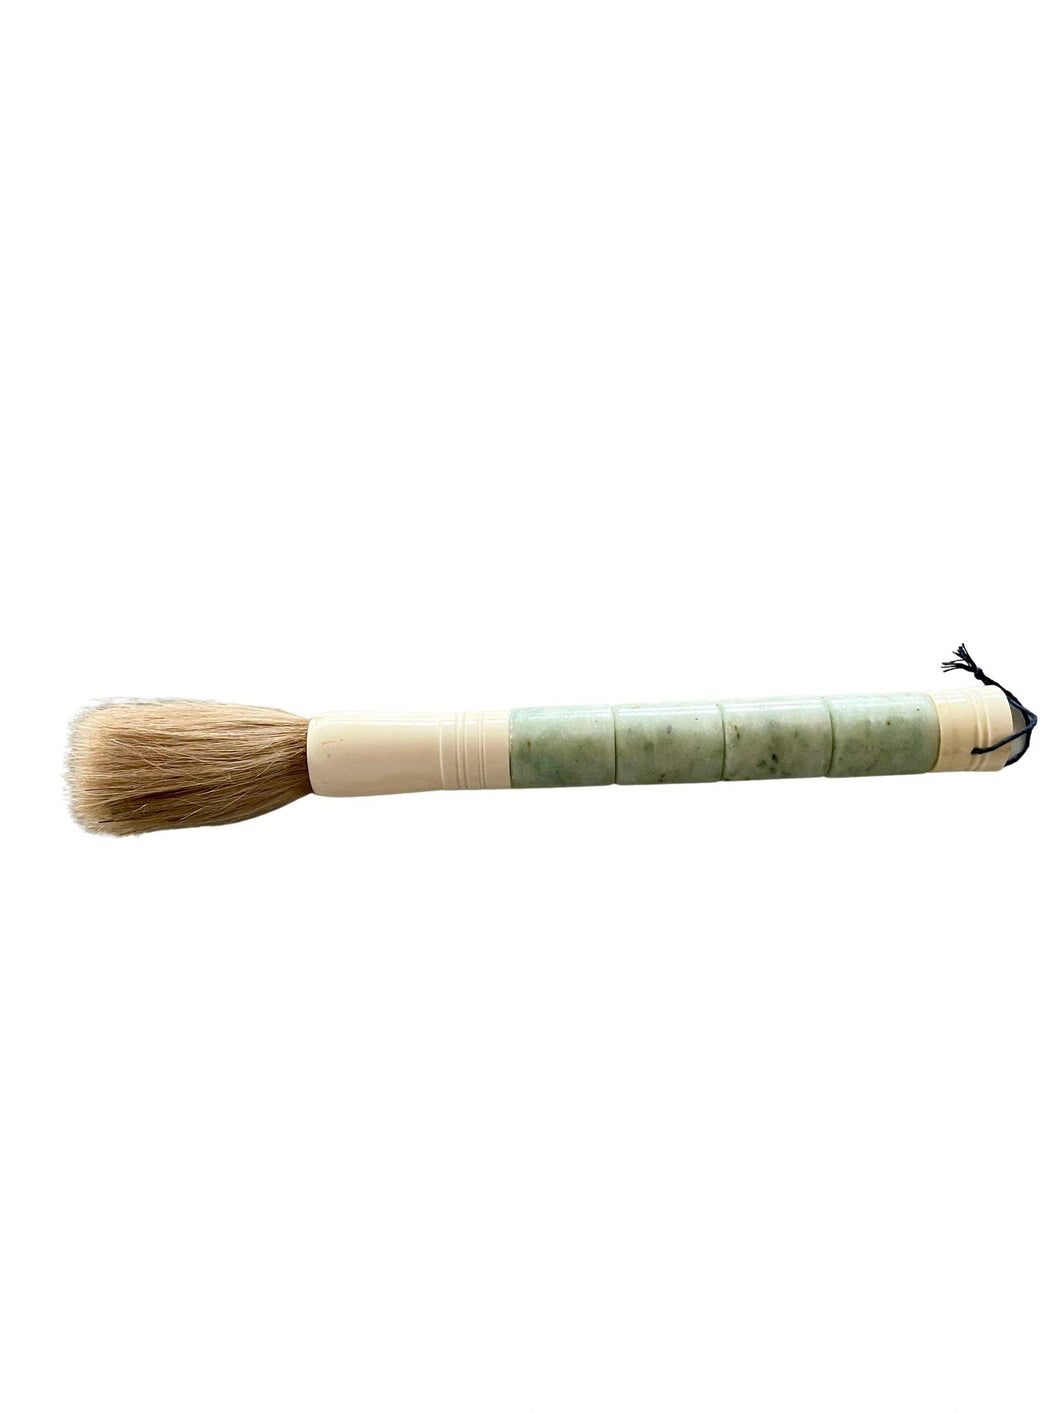 Calligraphy Brush, Light Green Marble Archer's Rings, Large